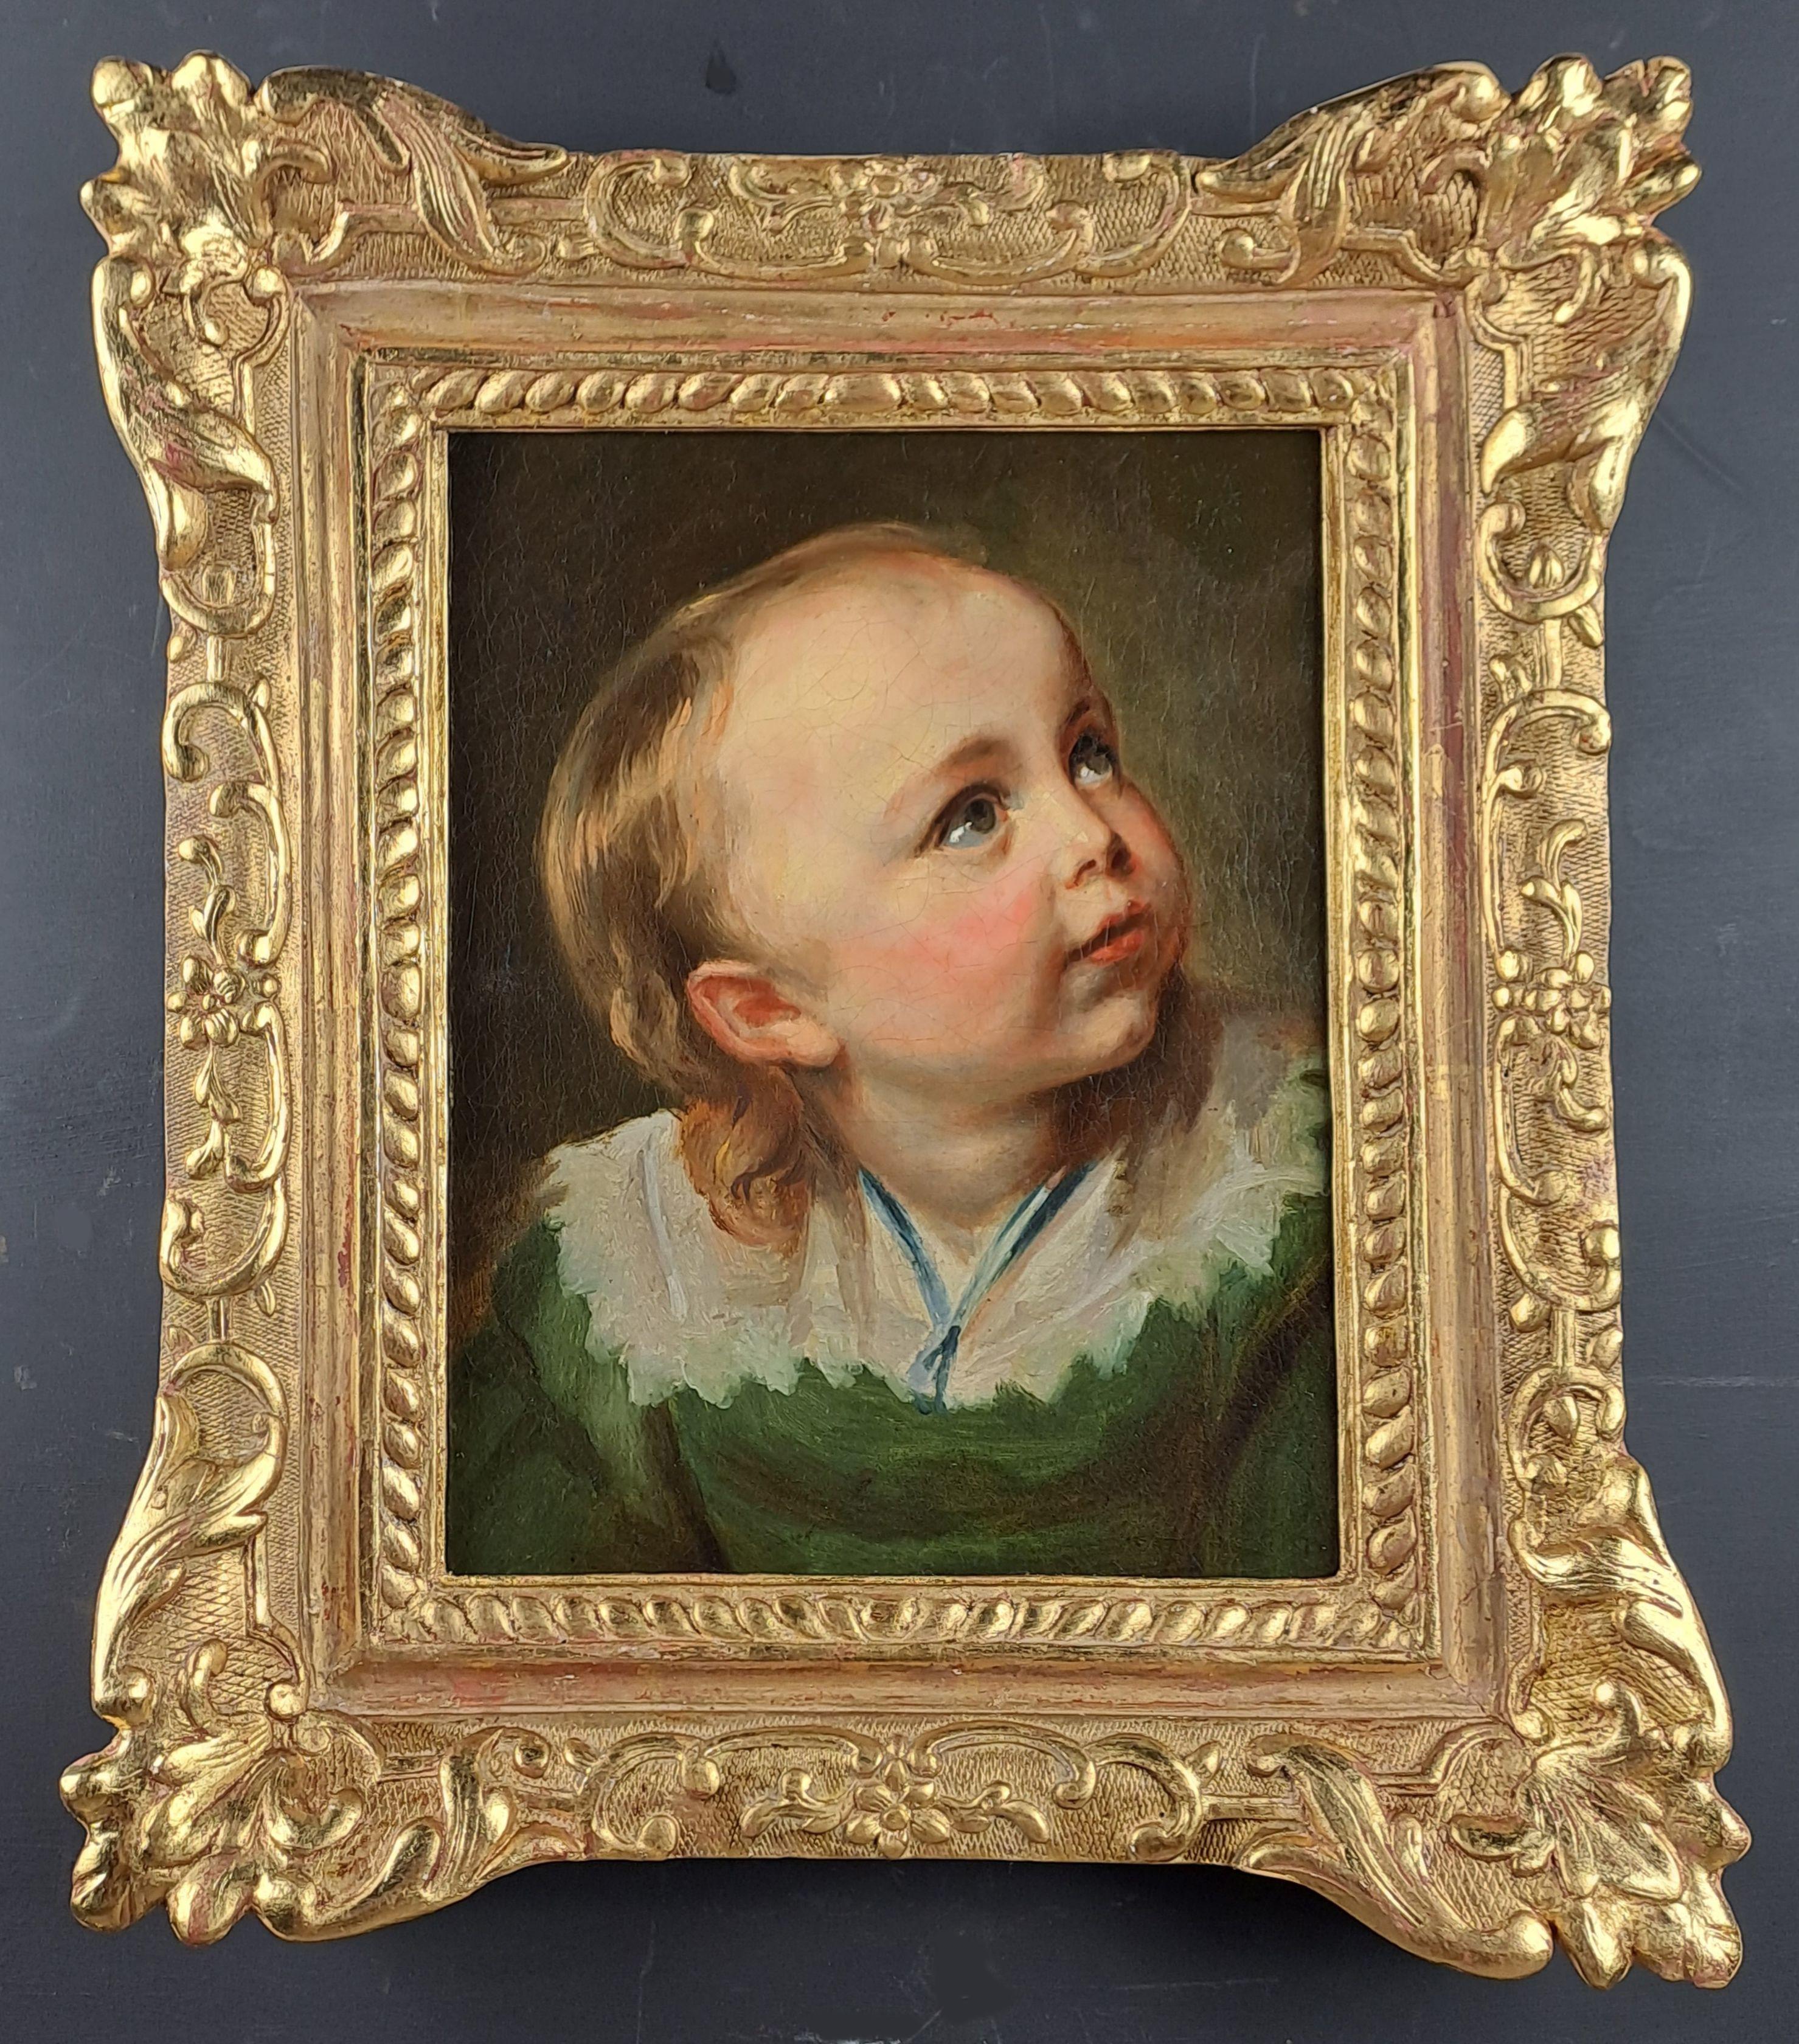 Oil on canvas from the 18th century depicting the portrait of a young child.

This portrait comes from the portrait of Rubens' brother painted in 1632 by Antoine Van Dyck.

Possibly a preparatory proof but more likely a later copy around the